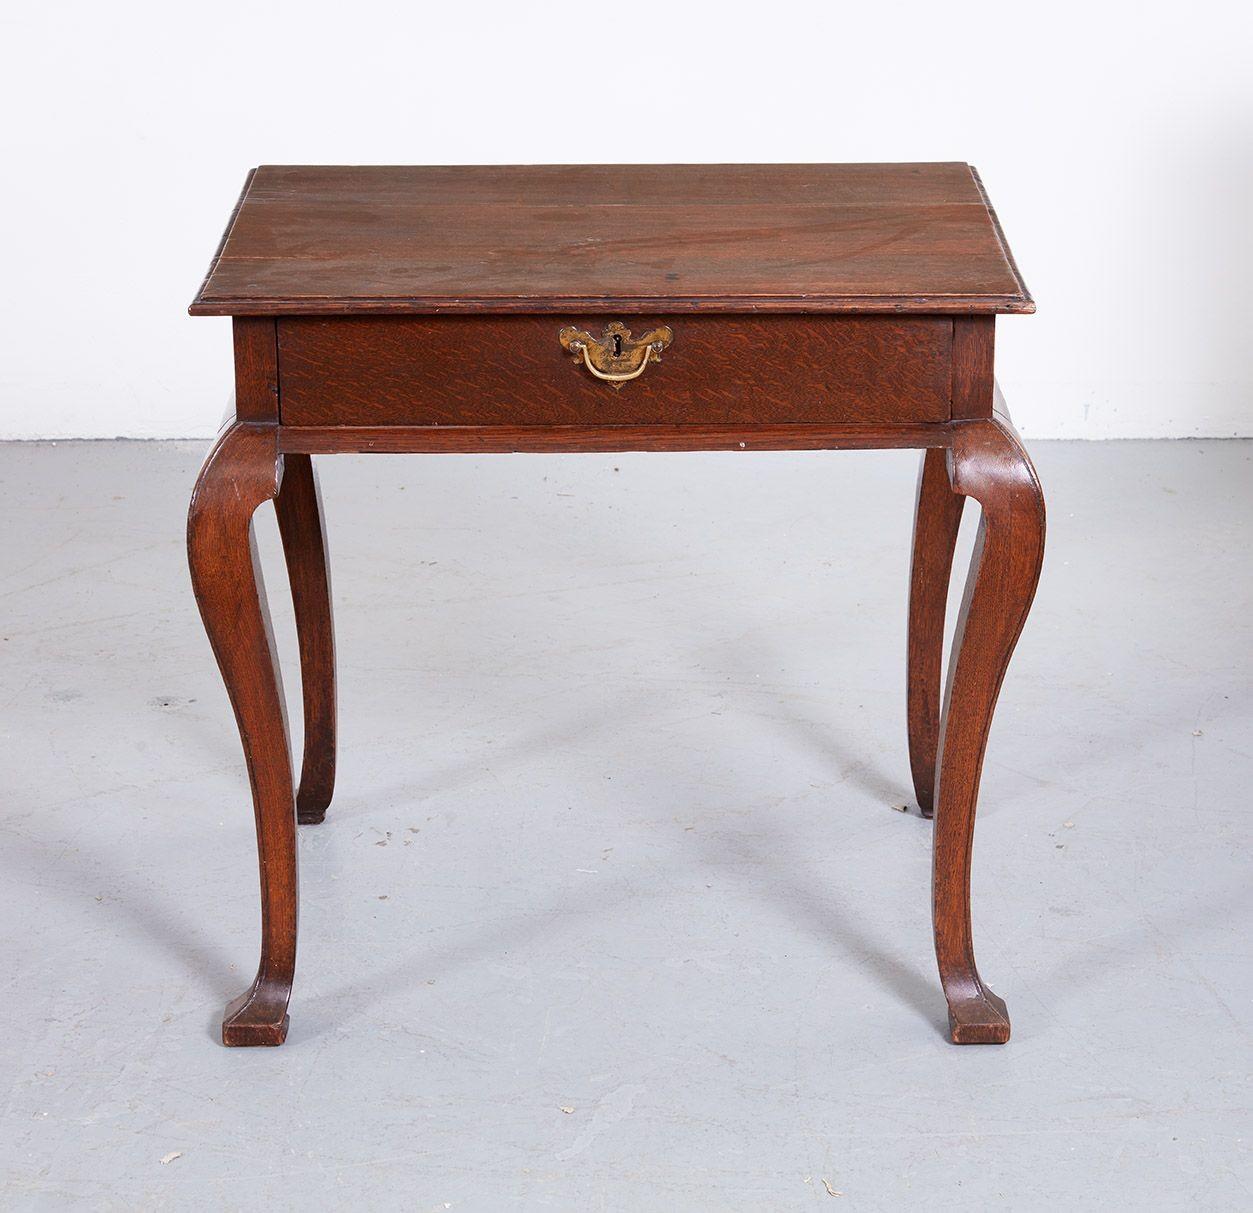 Early 18th century English oak table, the ogee molded top over single drawer retaining original gilt lacquer brass hardware, with quarter round molded apron, standing on square cut cabriole legs with beaded edge, the whole with good color and timber.